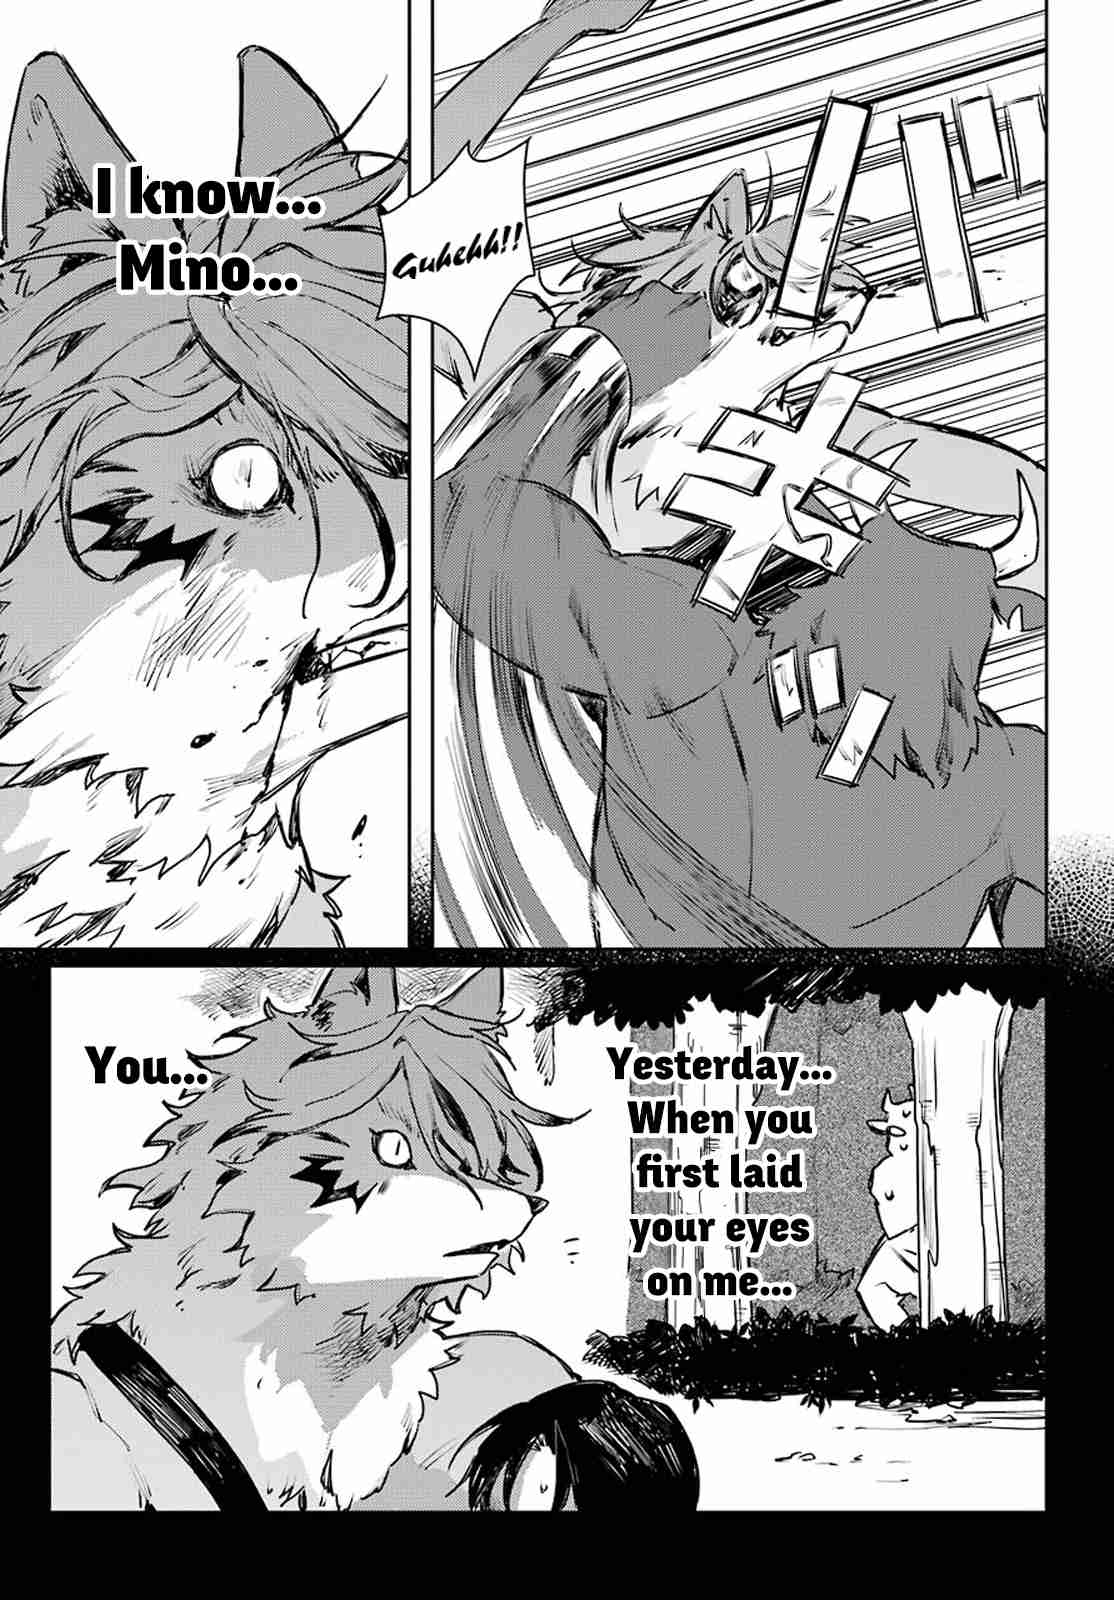 Minotaurus's Sweetheart Ch. 8 Even Though We're Friends